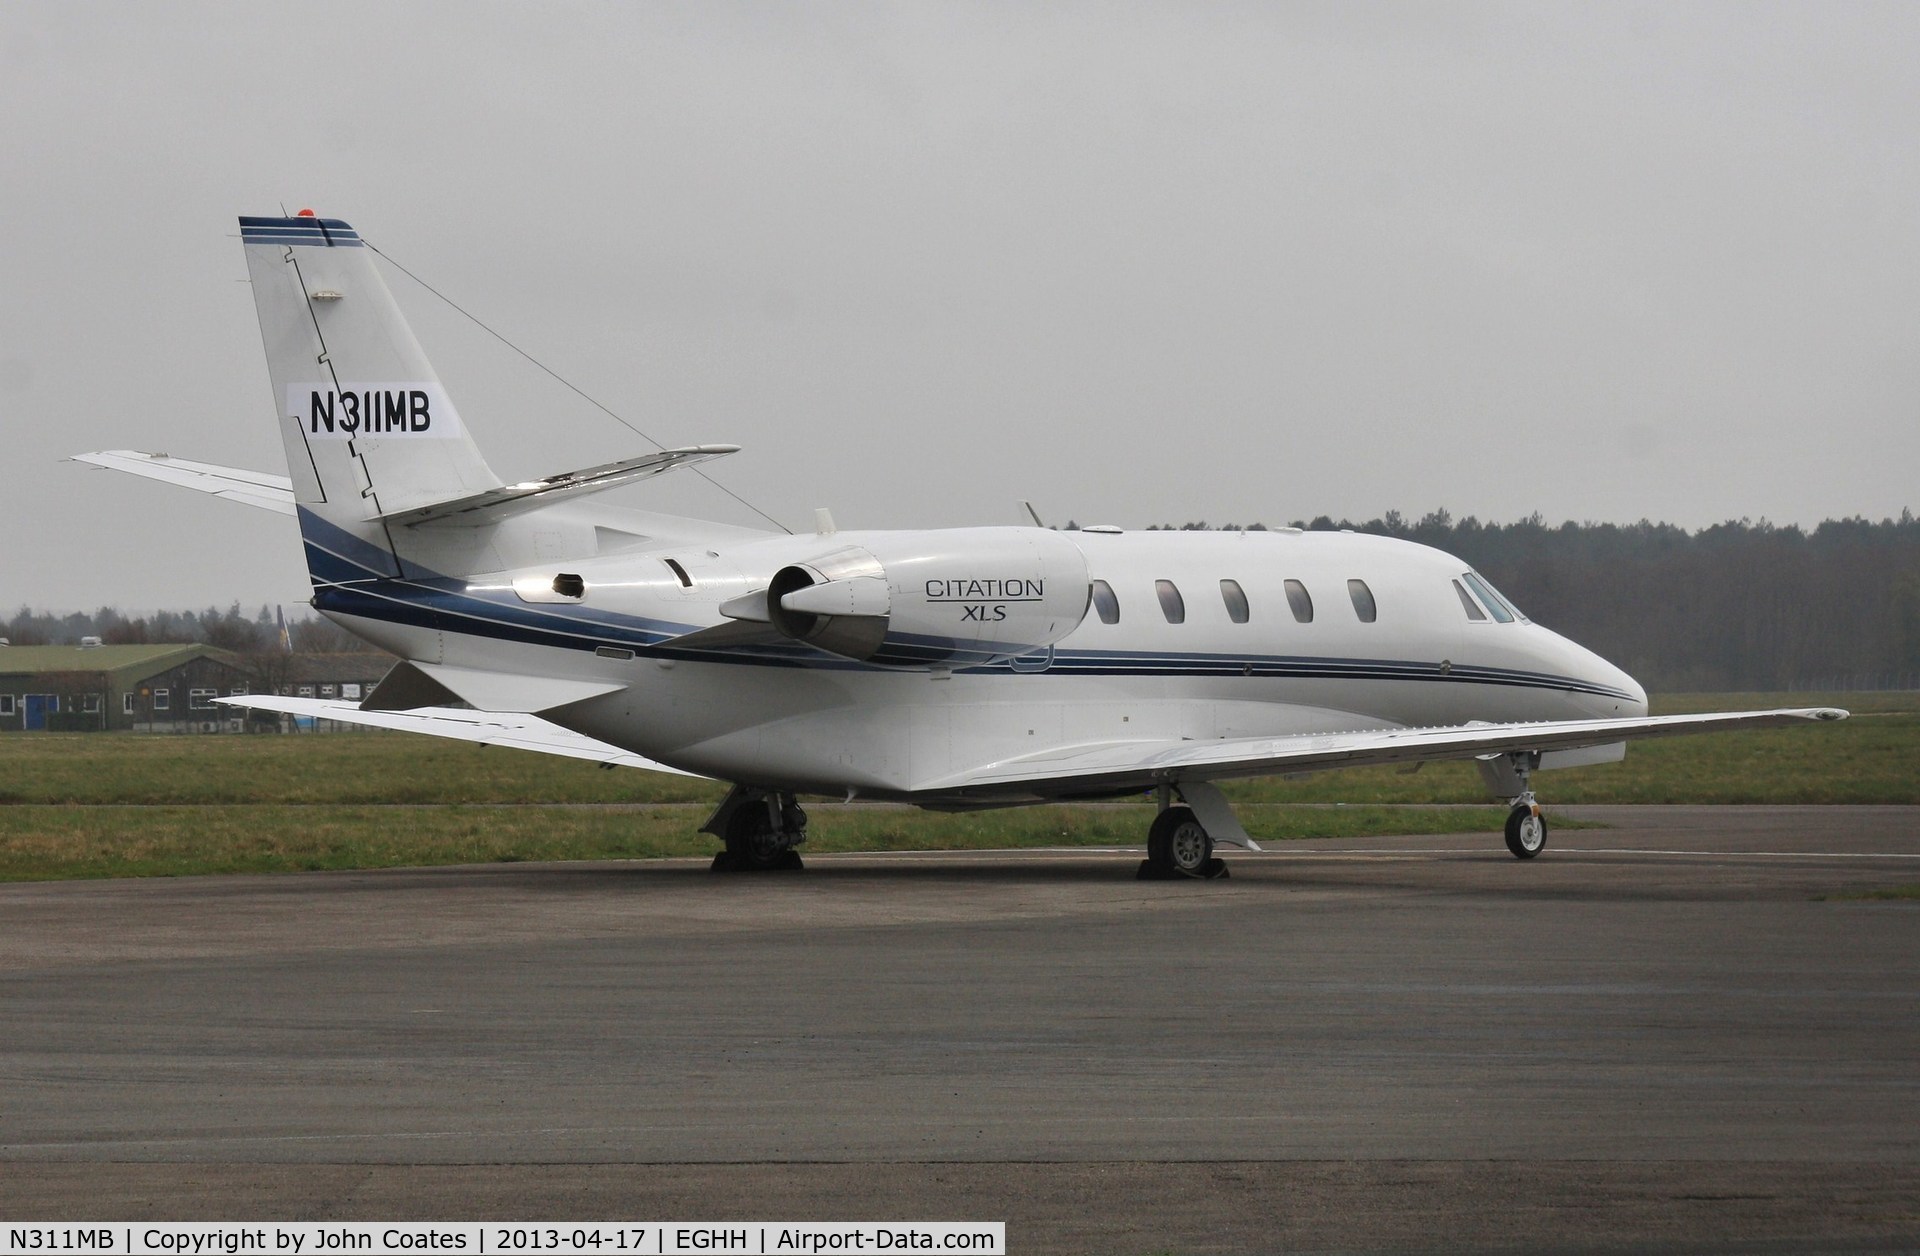 N311MB, 2008 Cessna 560XL Citation  XLS C/N 560-5770, Just re-reg'd from M-XJOB and about to depart to USA